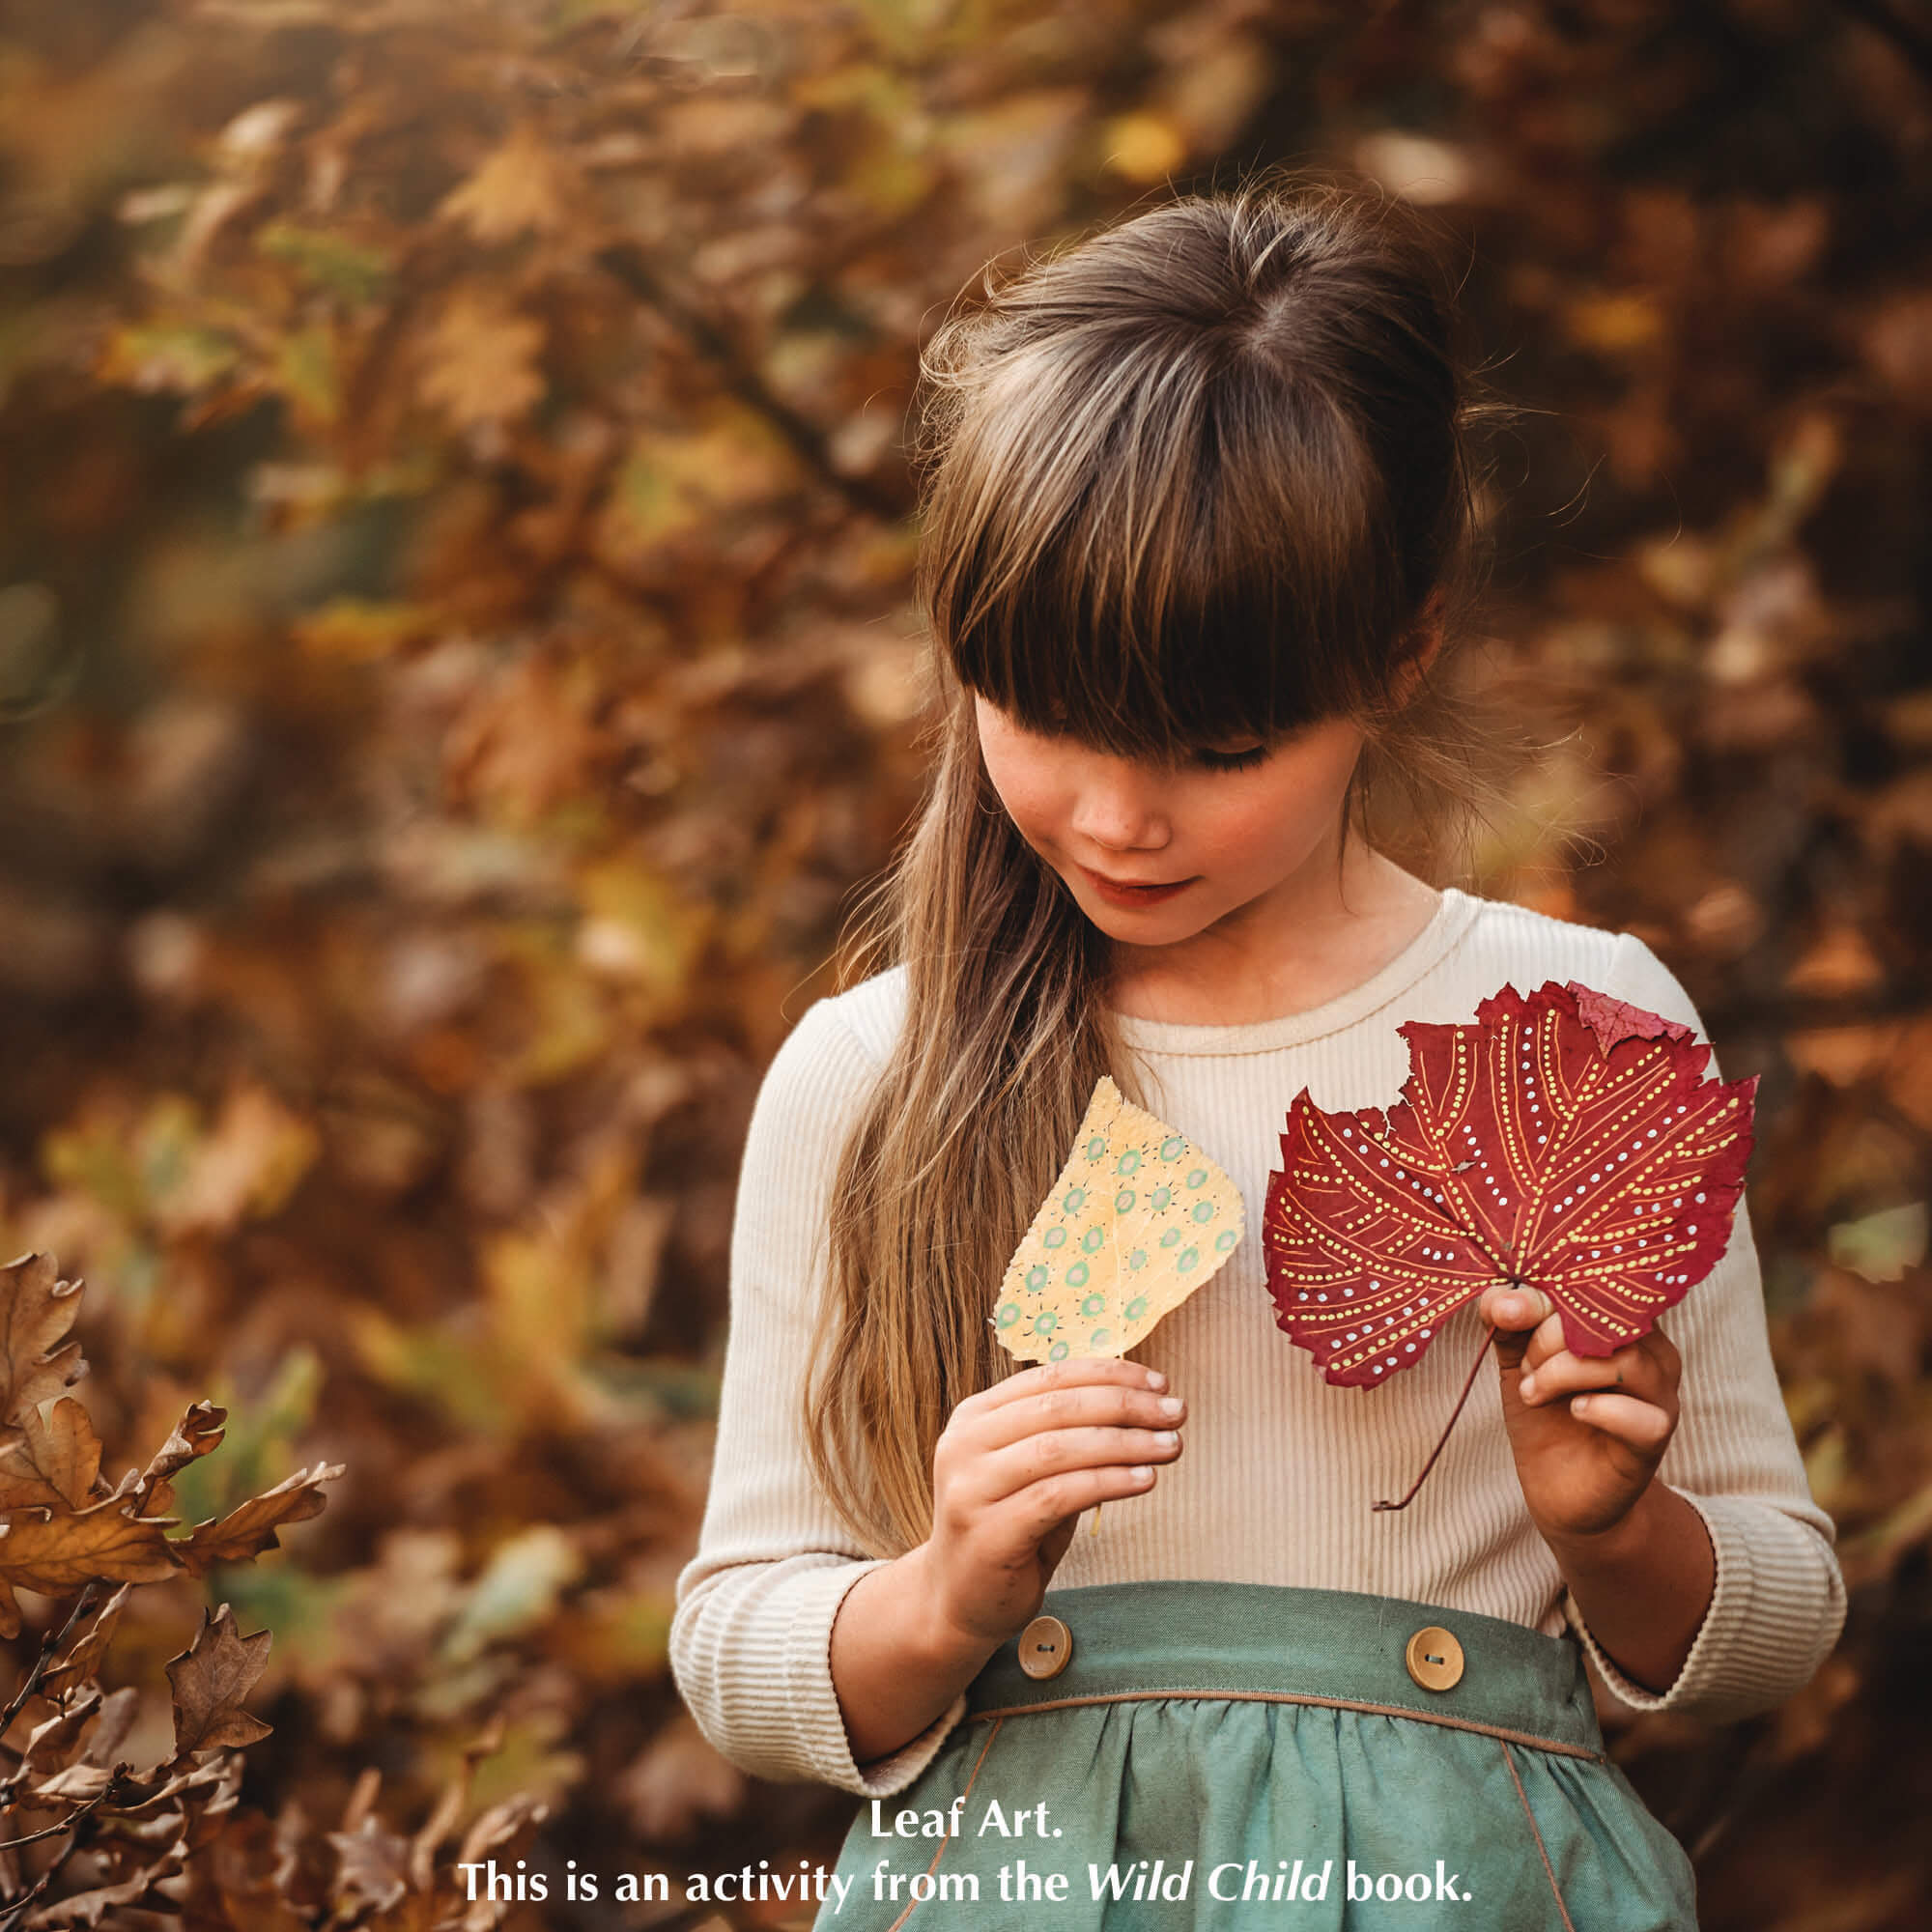 Leaf art using paint pens as featured in Nature Craft Starter Pack from Your Wild Books includes Wild Imagination book, Wild Child book, paint pens in classic colours and an opinel beginners whittling knife. Save 20%